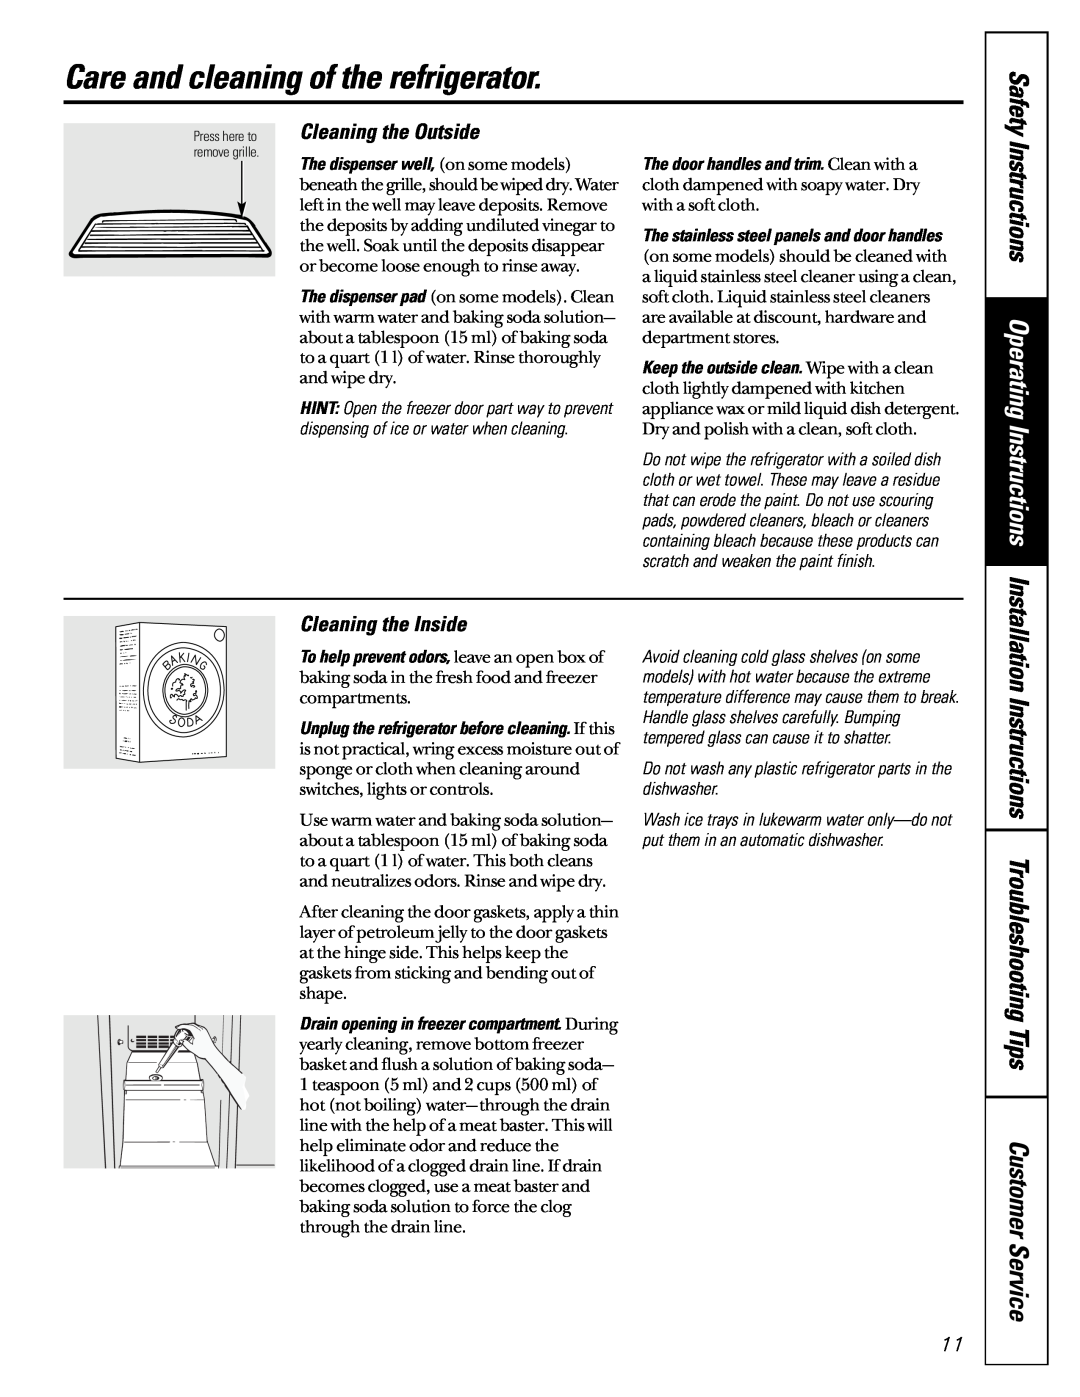 GE 162D7744P009 Care and cleaning of the refrigerator, Instructions Operating Instructions, Cleaning the Outside 